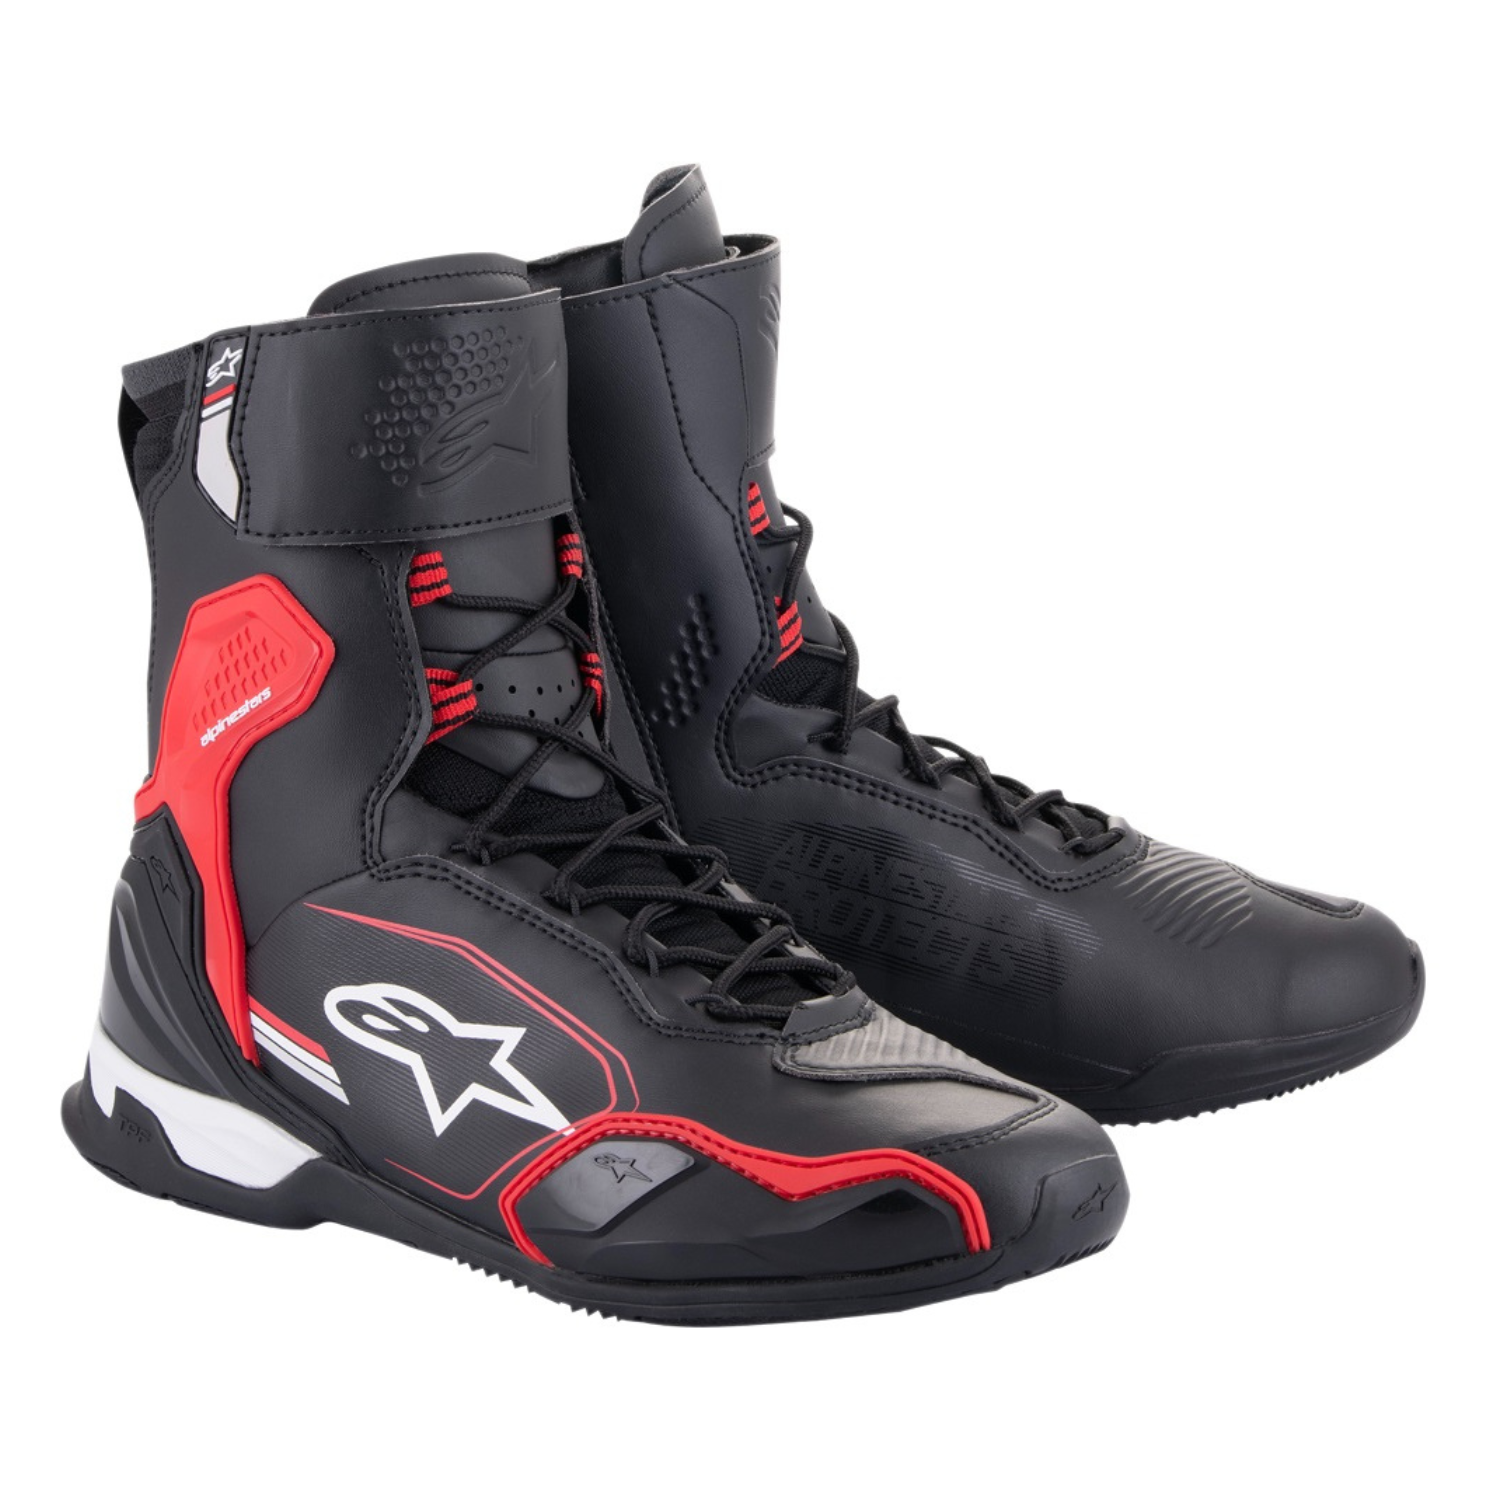 Image of Alpinestars Superfaster Shoes Black Bright Red White Size US 7 ID 8059347260921